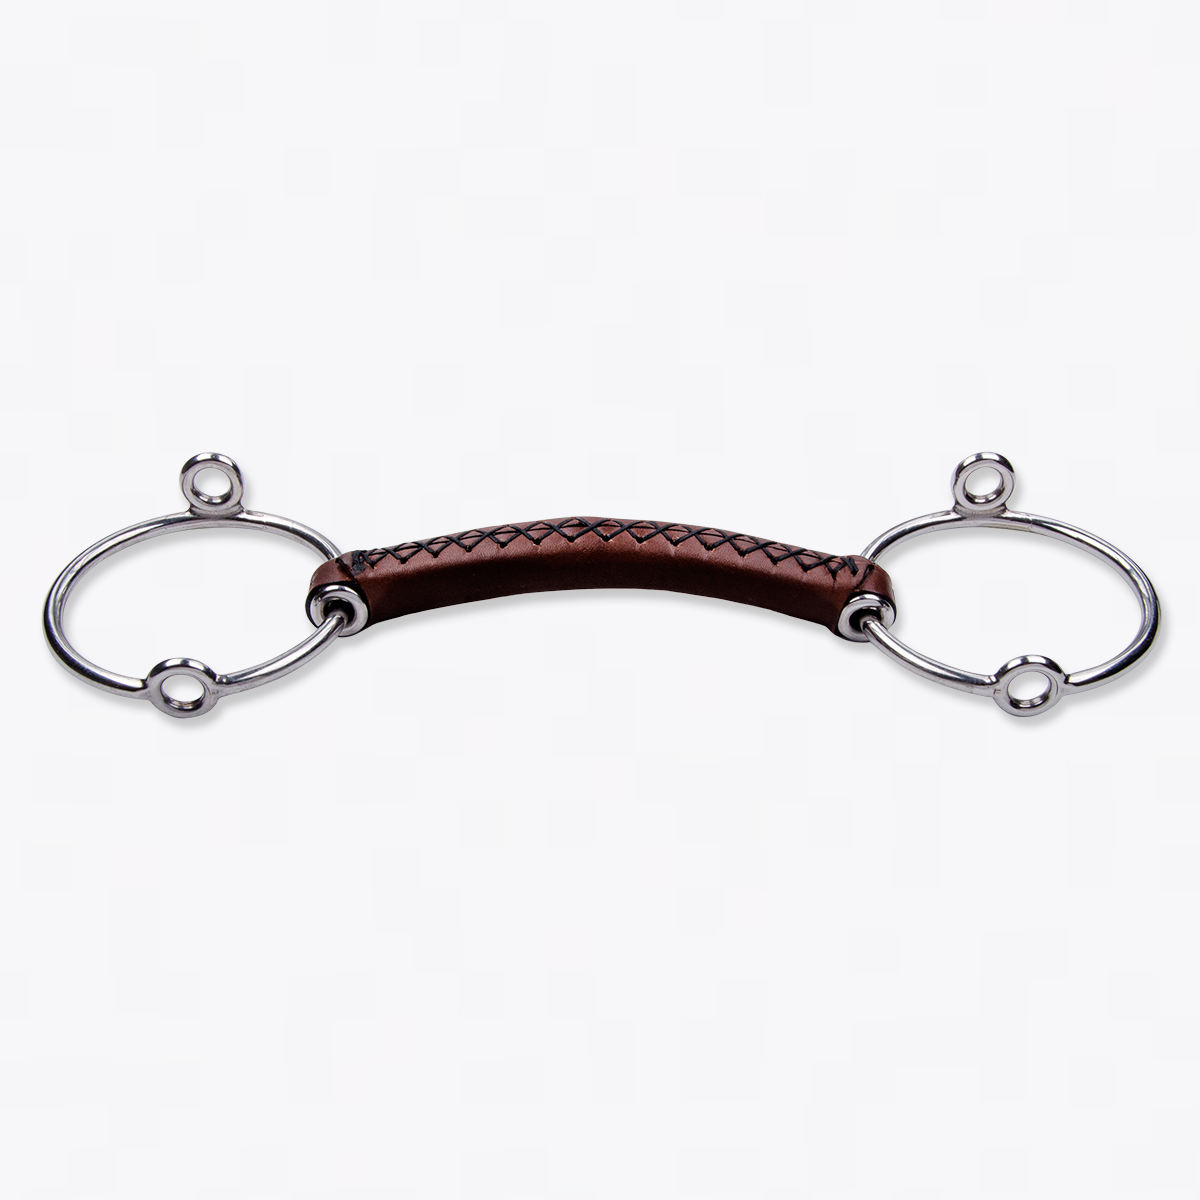 Trust Leather Loose Ring Gag